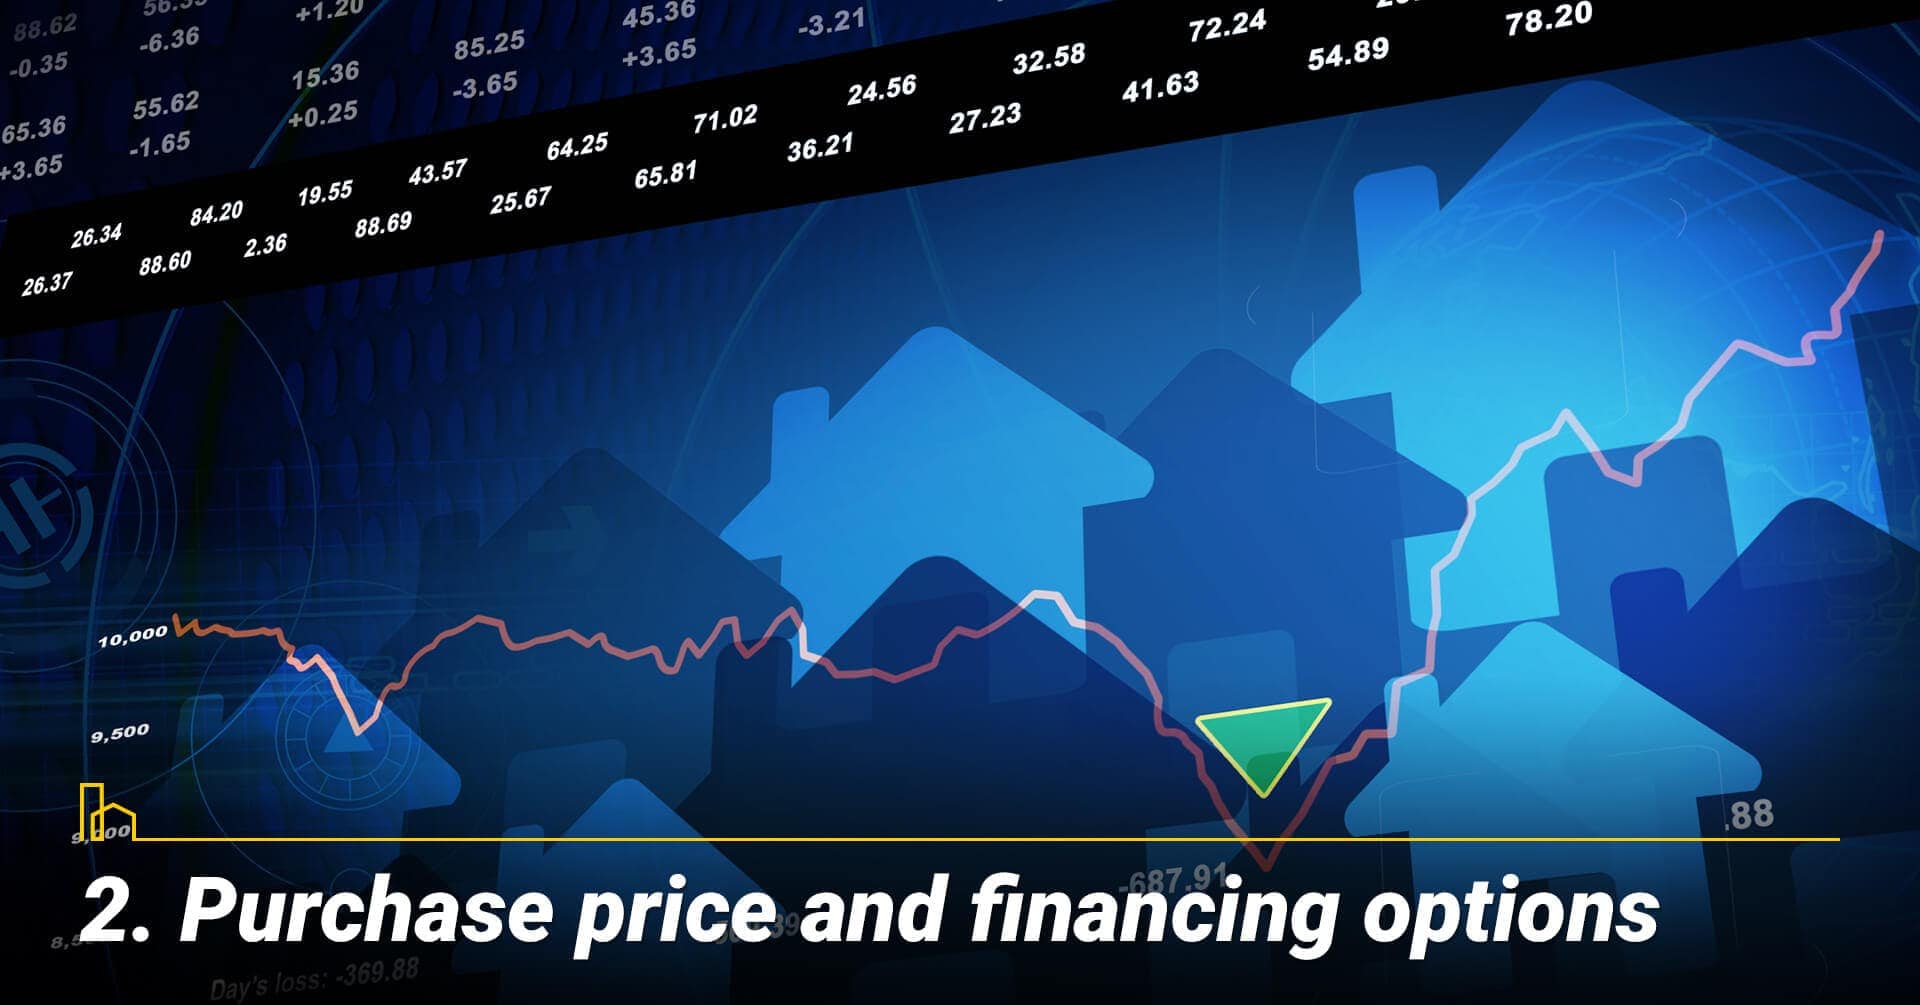 Purchase price and financing options, consider your options